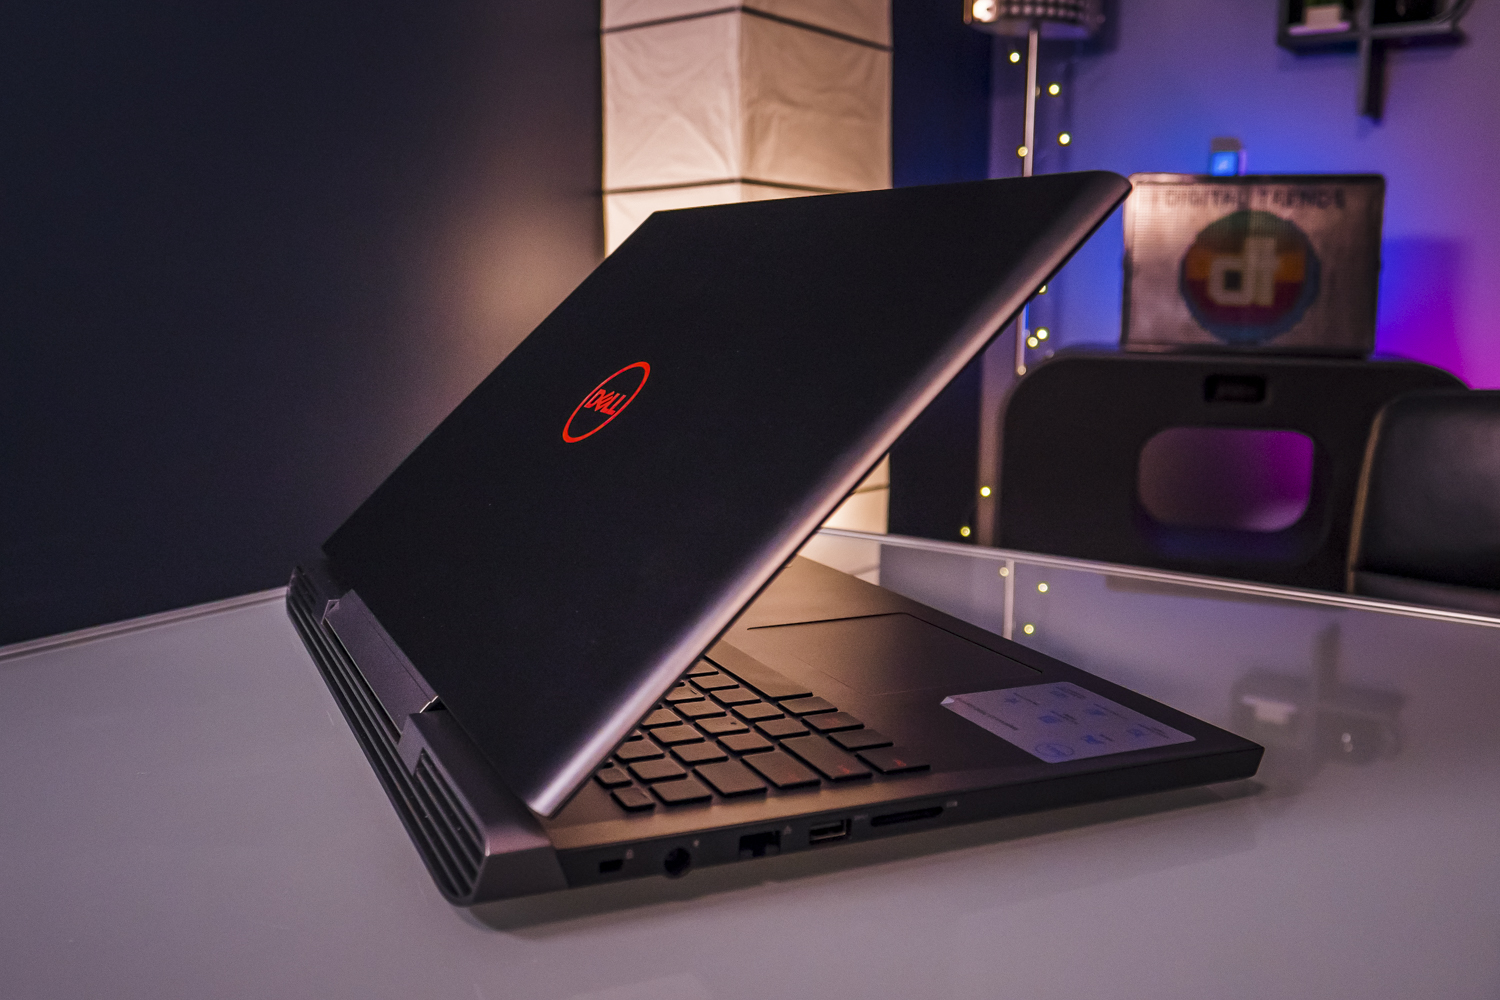 Dell Inspiron 15 7000 review: A gaming laptop at a decidedly non